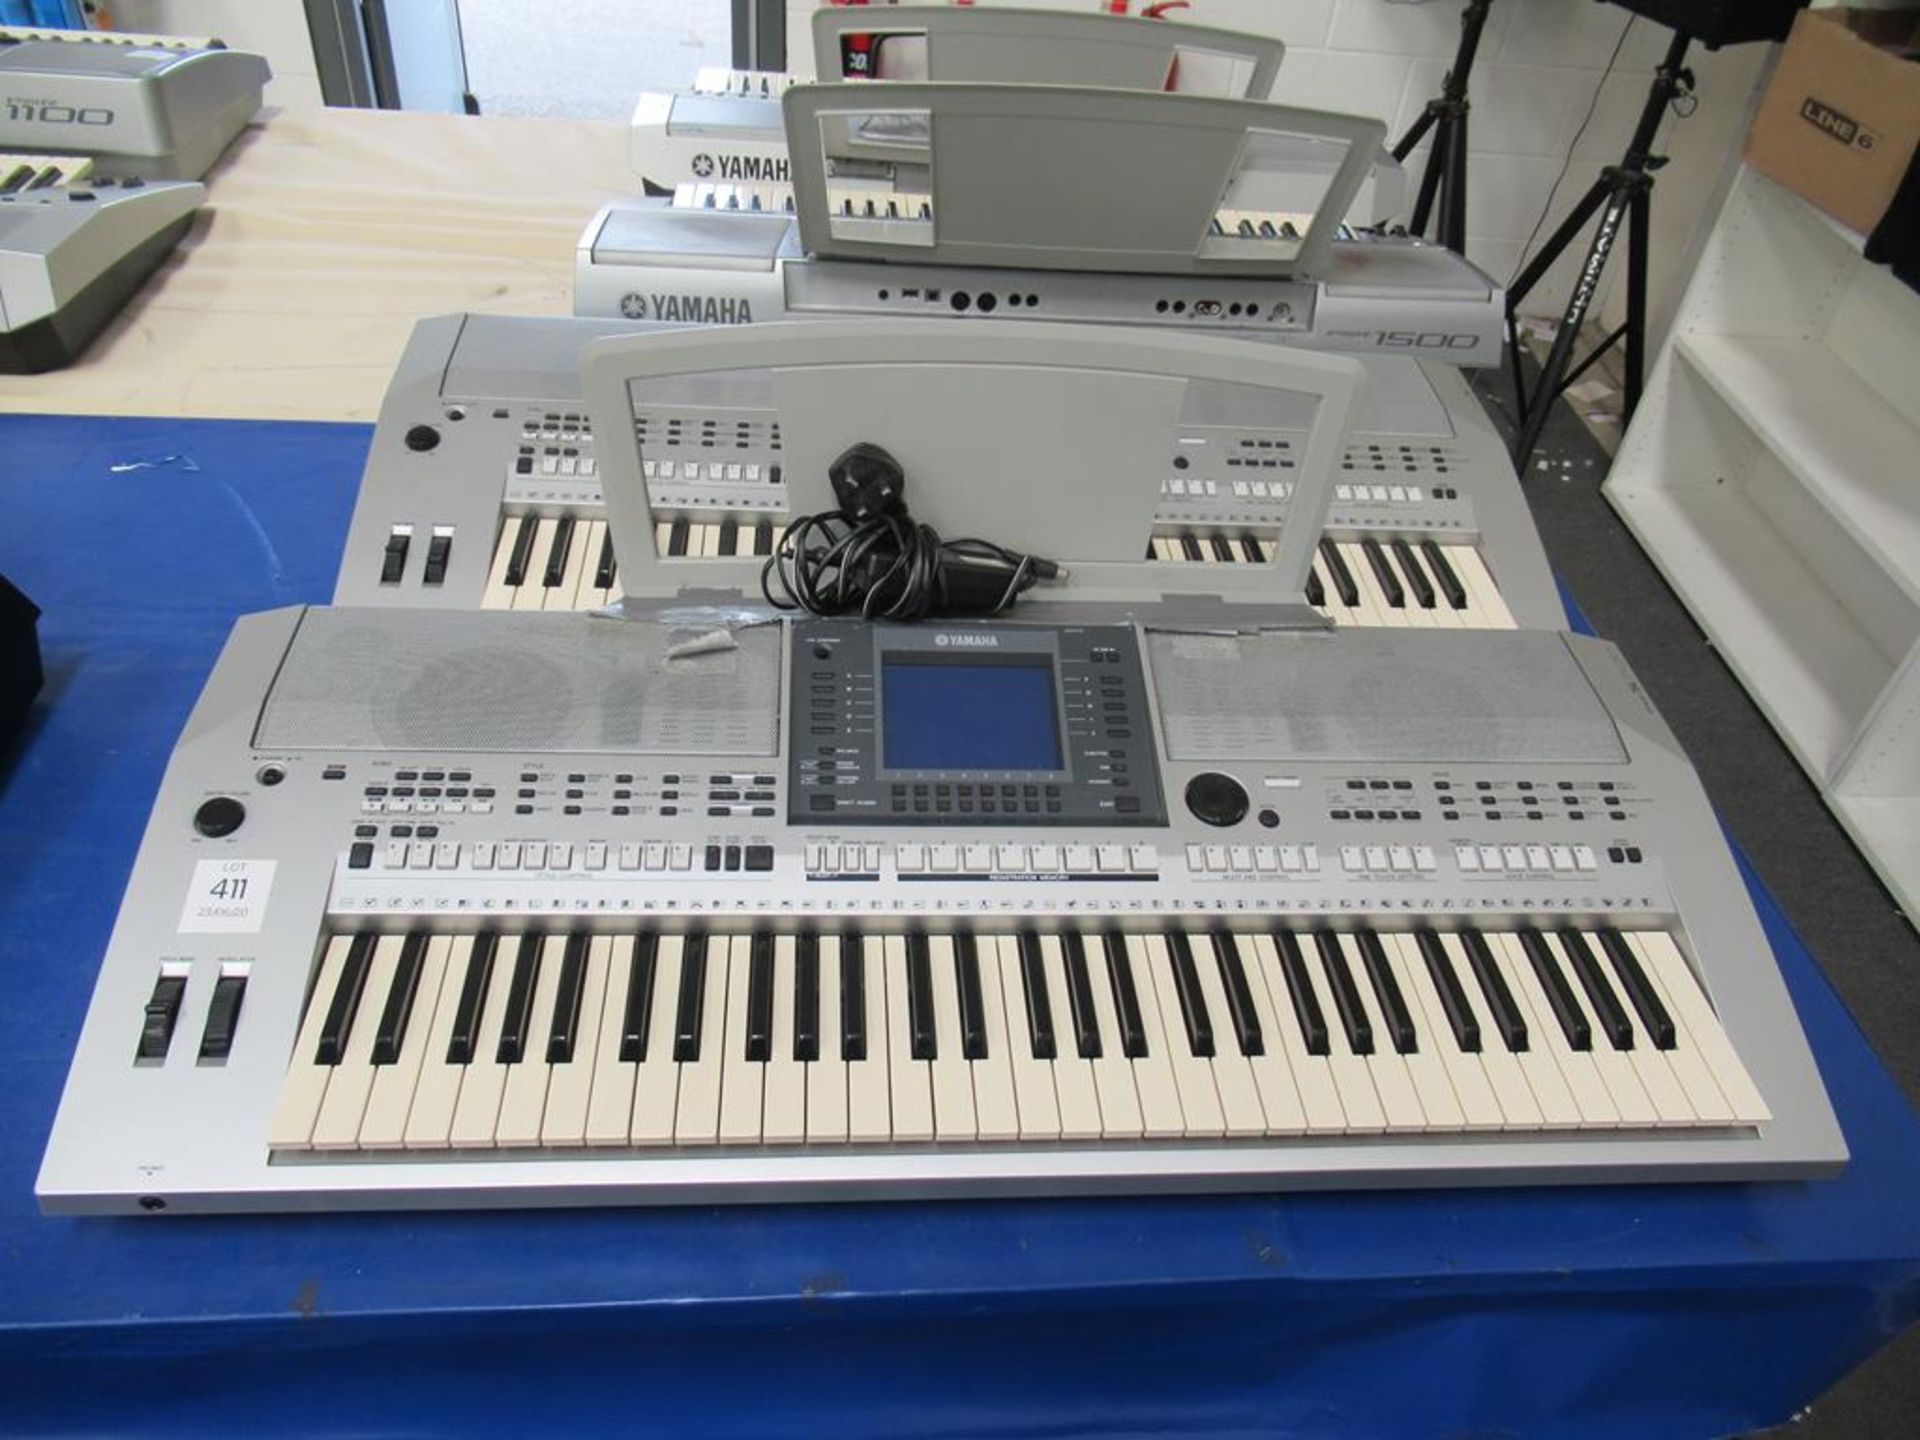 Two second hand Yamaha keyboards (2 x PSR-S700)